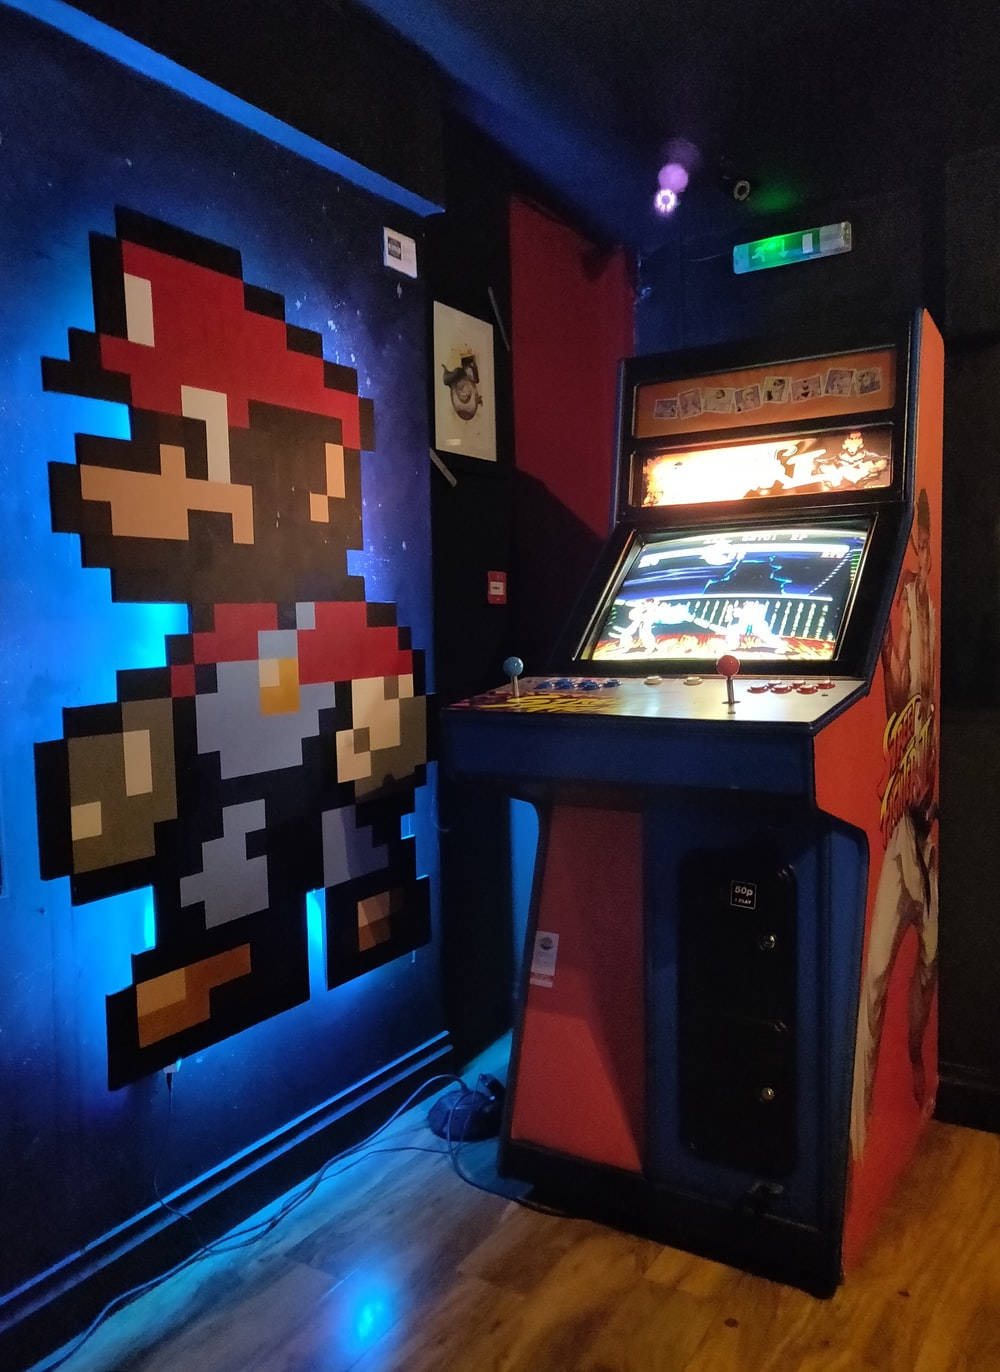 Step out of the ordinary and into an unforgettable arcade experience! Wallpaper